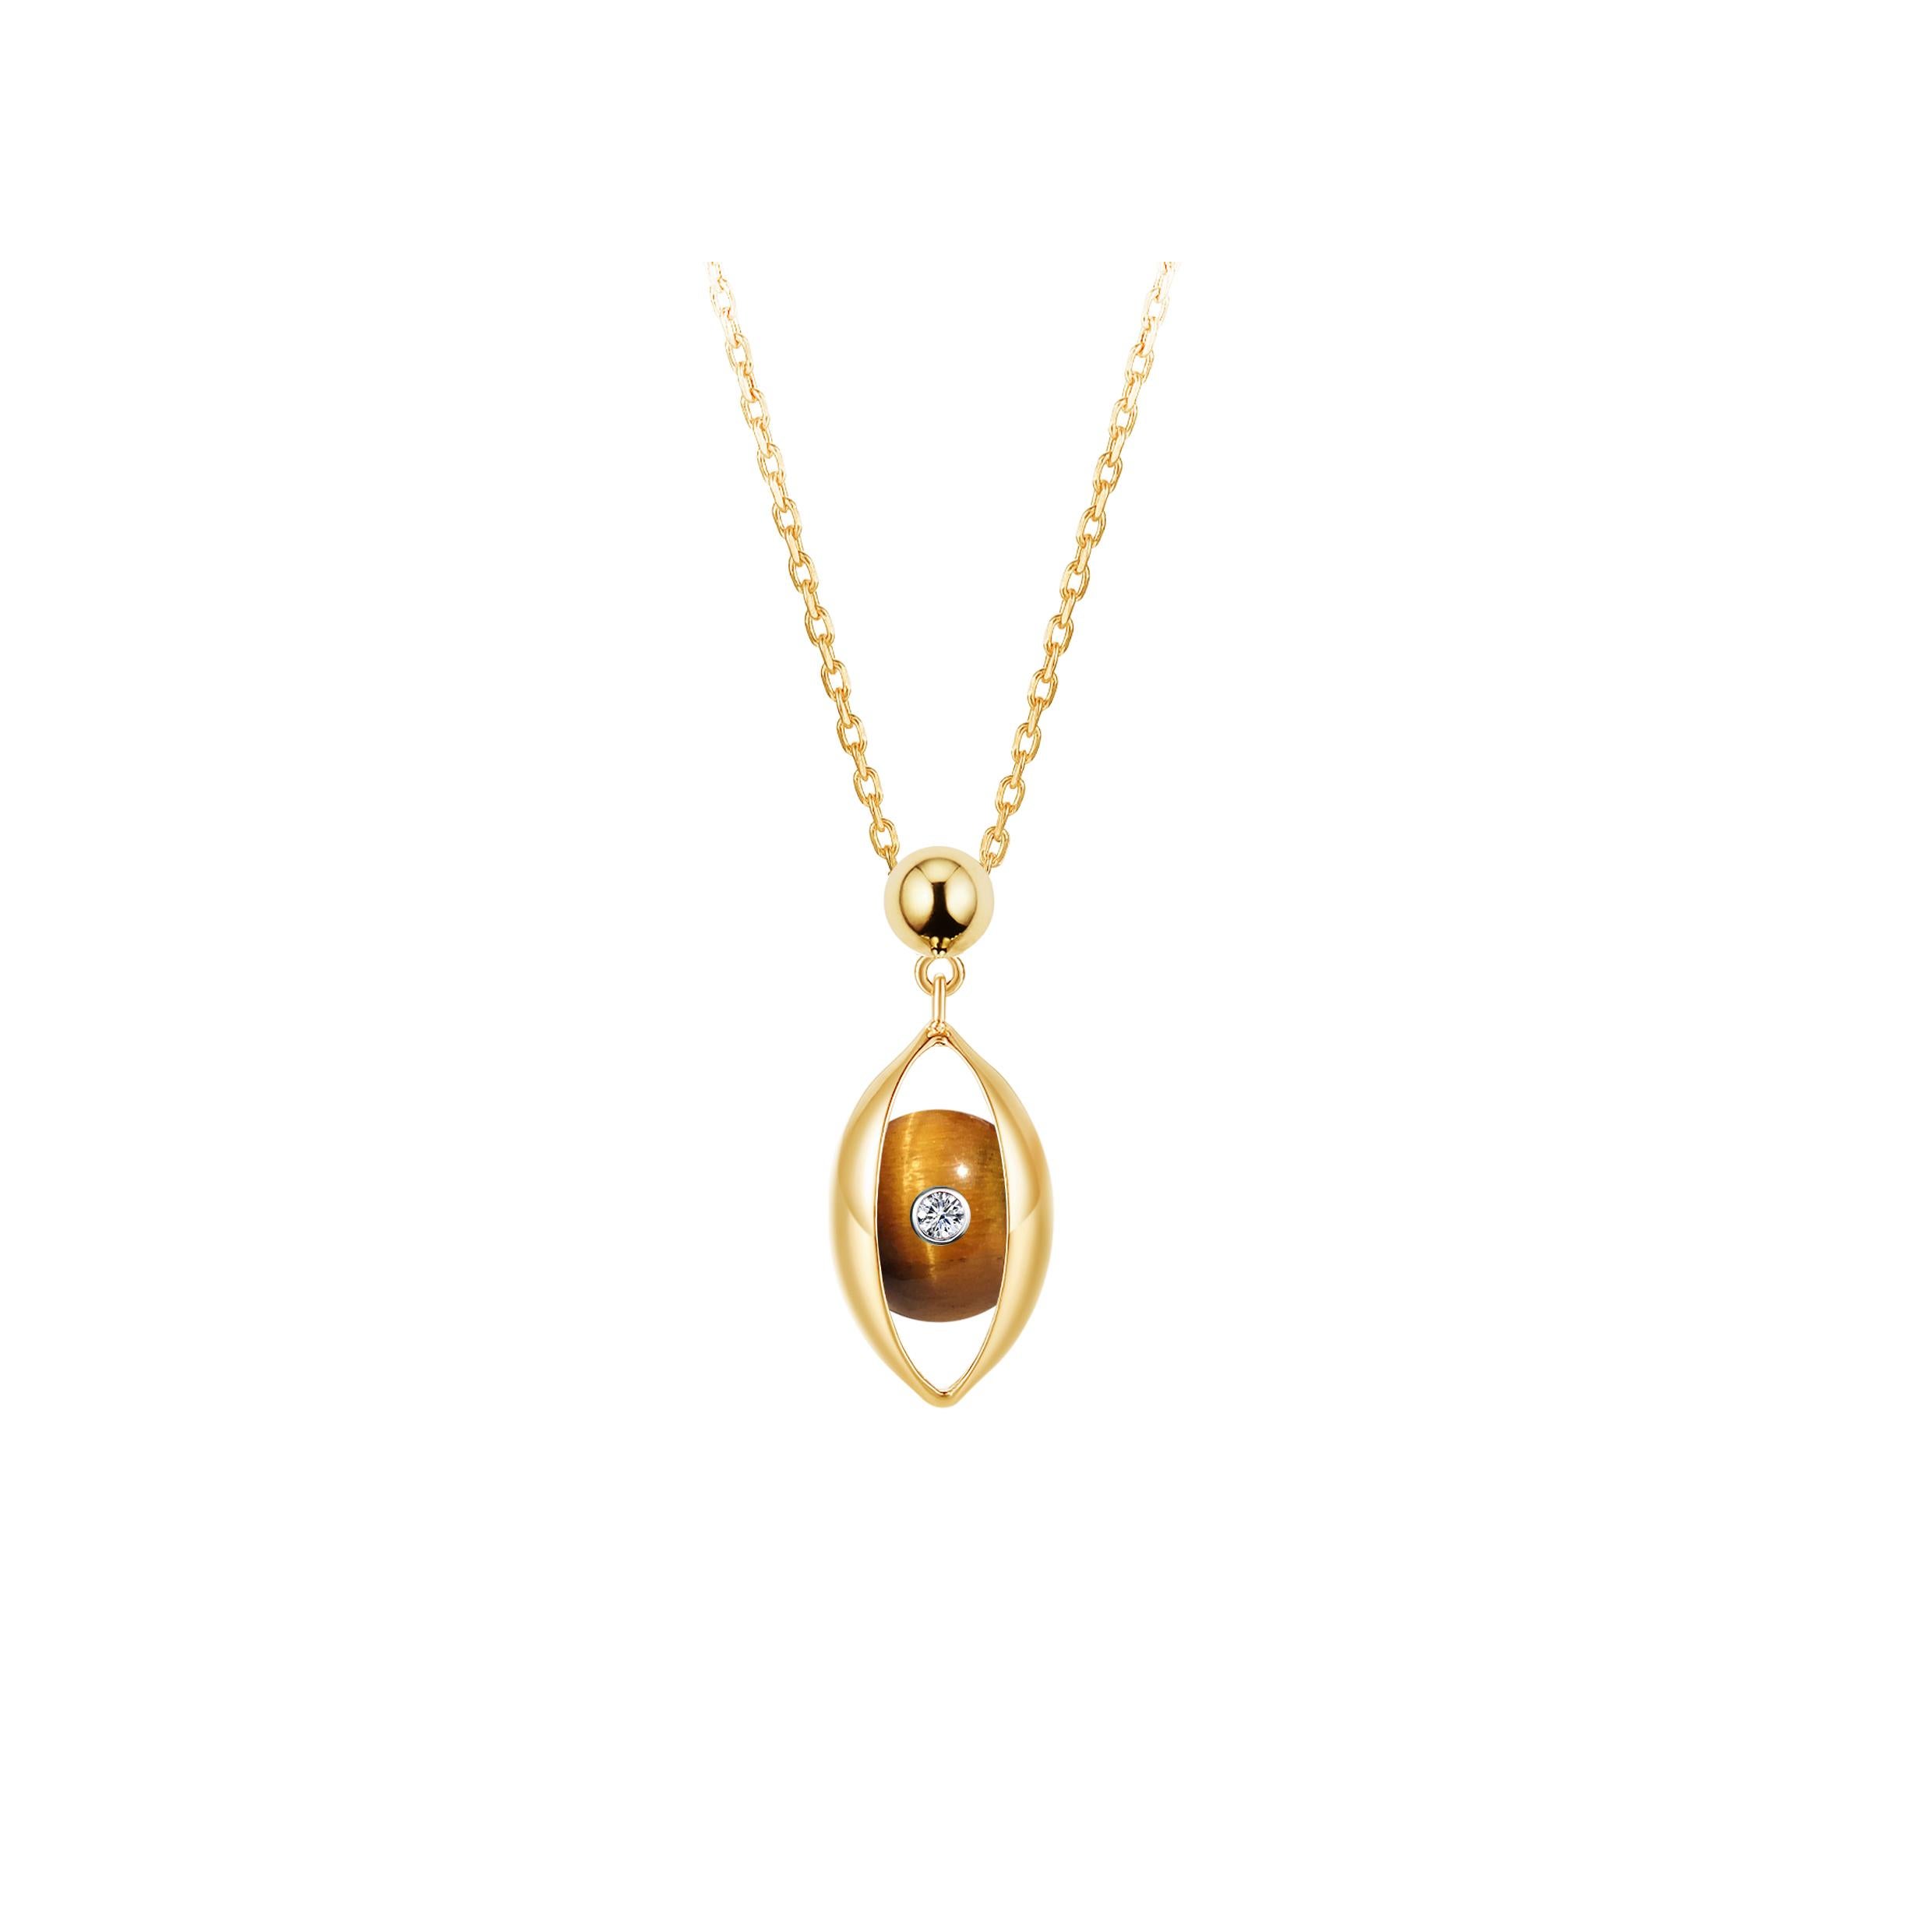 This very unique eye pendant necklace from The Eye collection, it's a perfect everyday talisman. The Eye collection showcases this award winning, fine jewellery designer’s extraordinary talent to work with shapes, materials, texture and, his